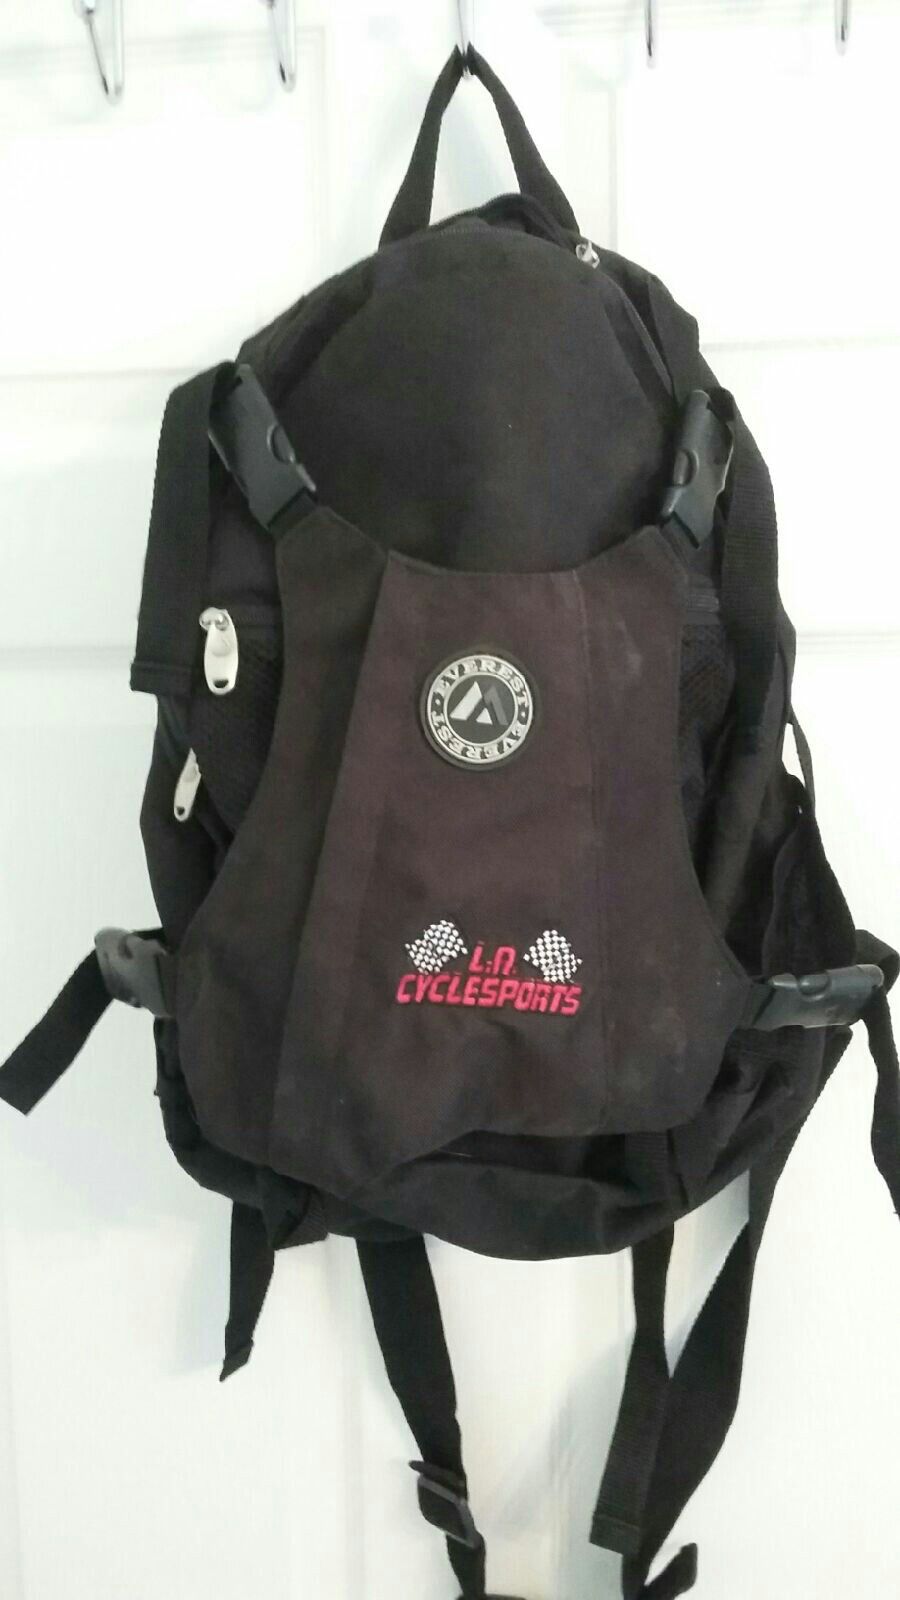 CYCLESPORTS BACKPAK EXCELLENT CONDITION